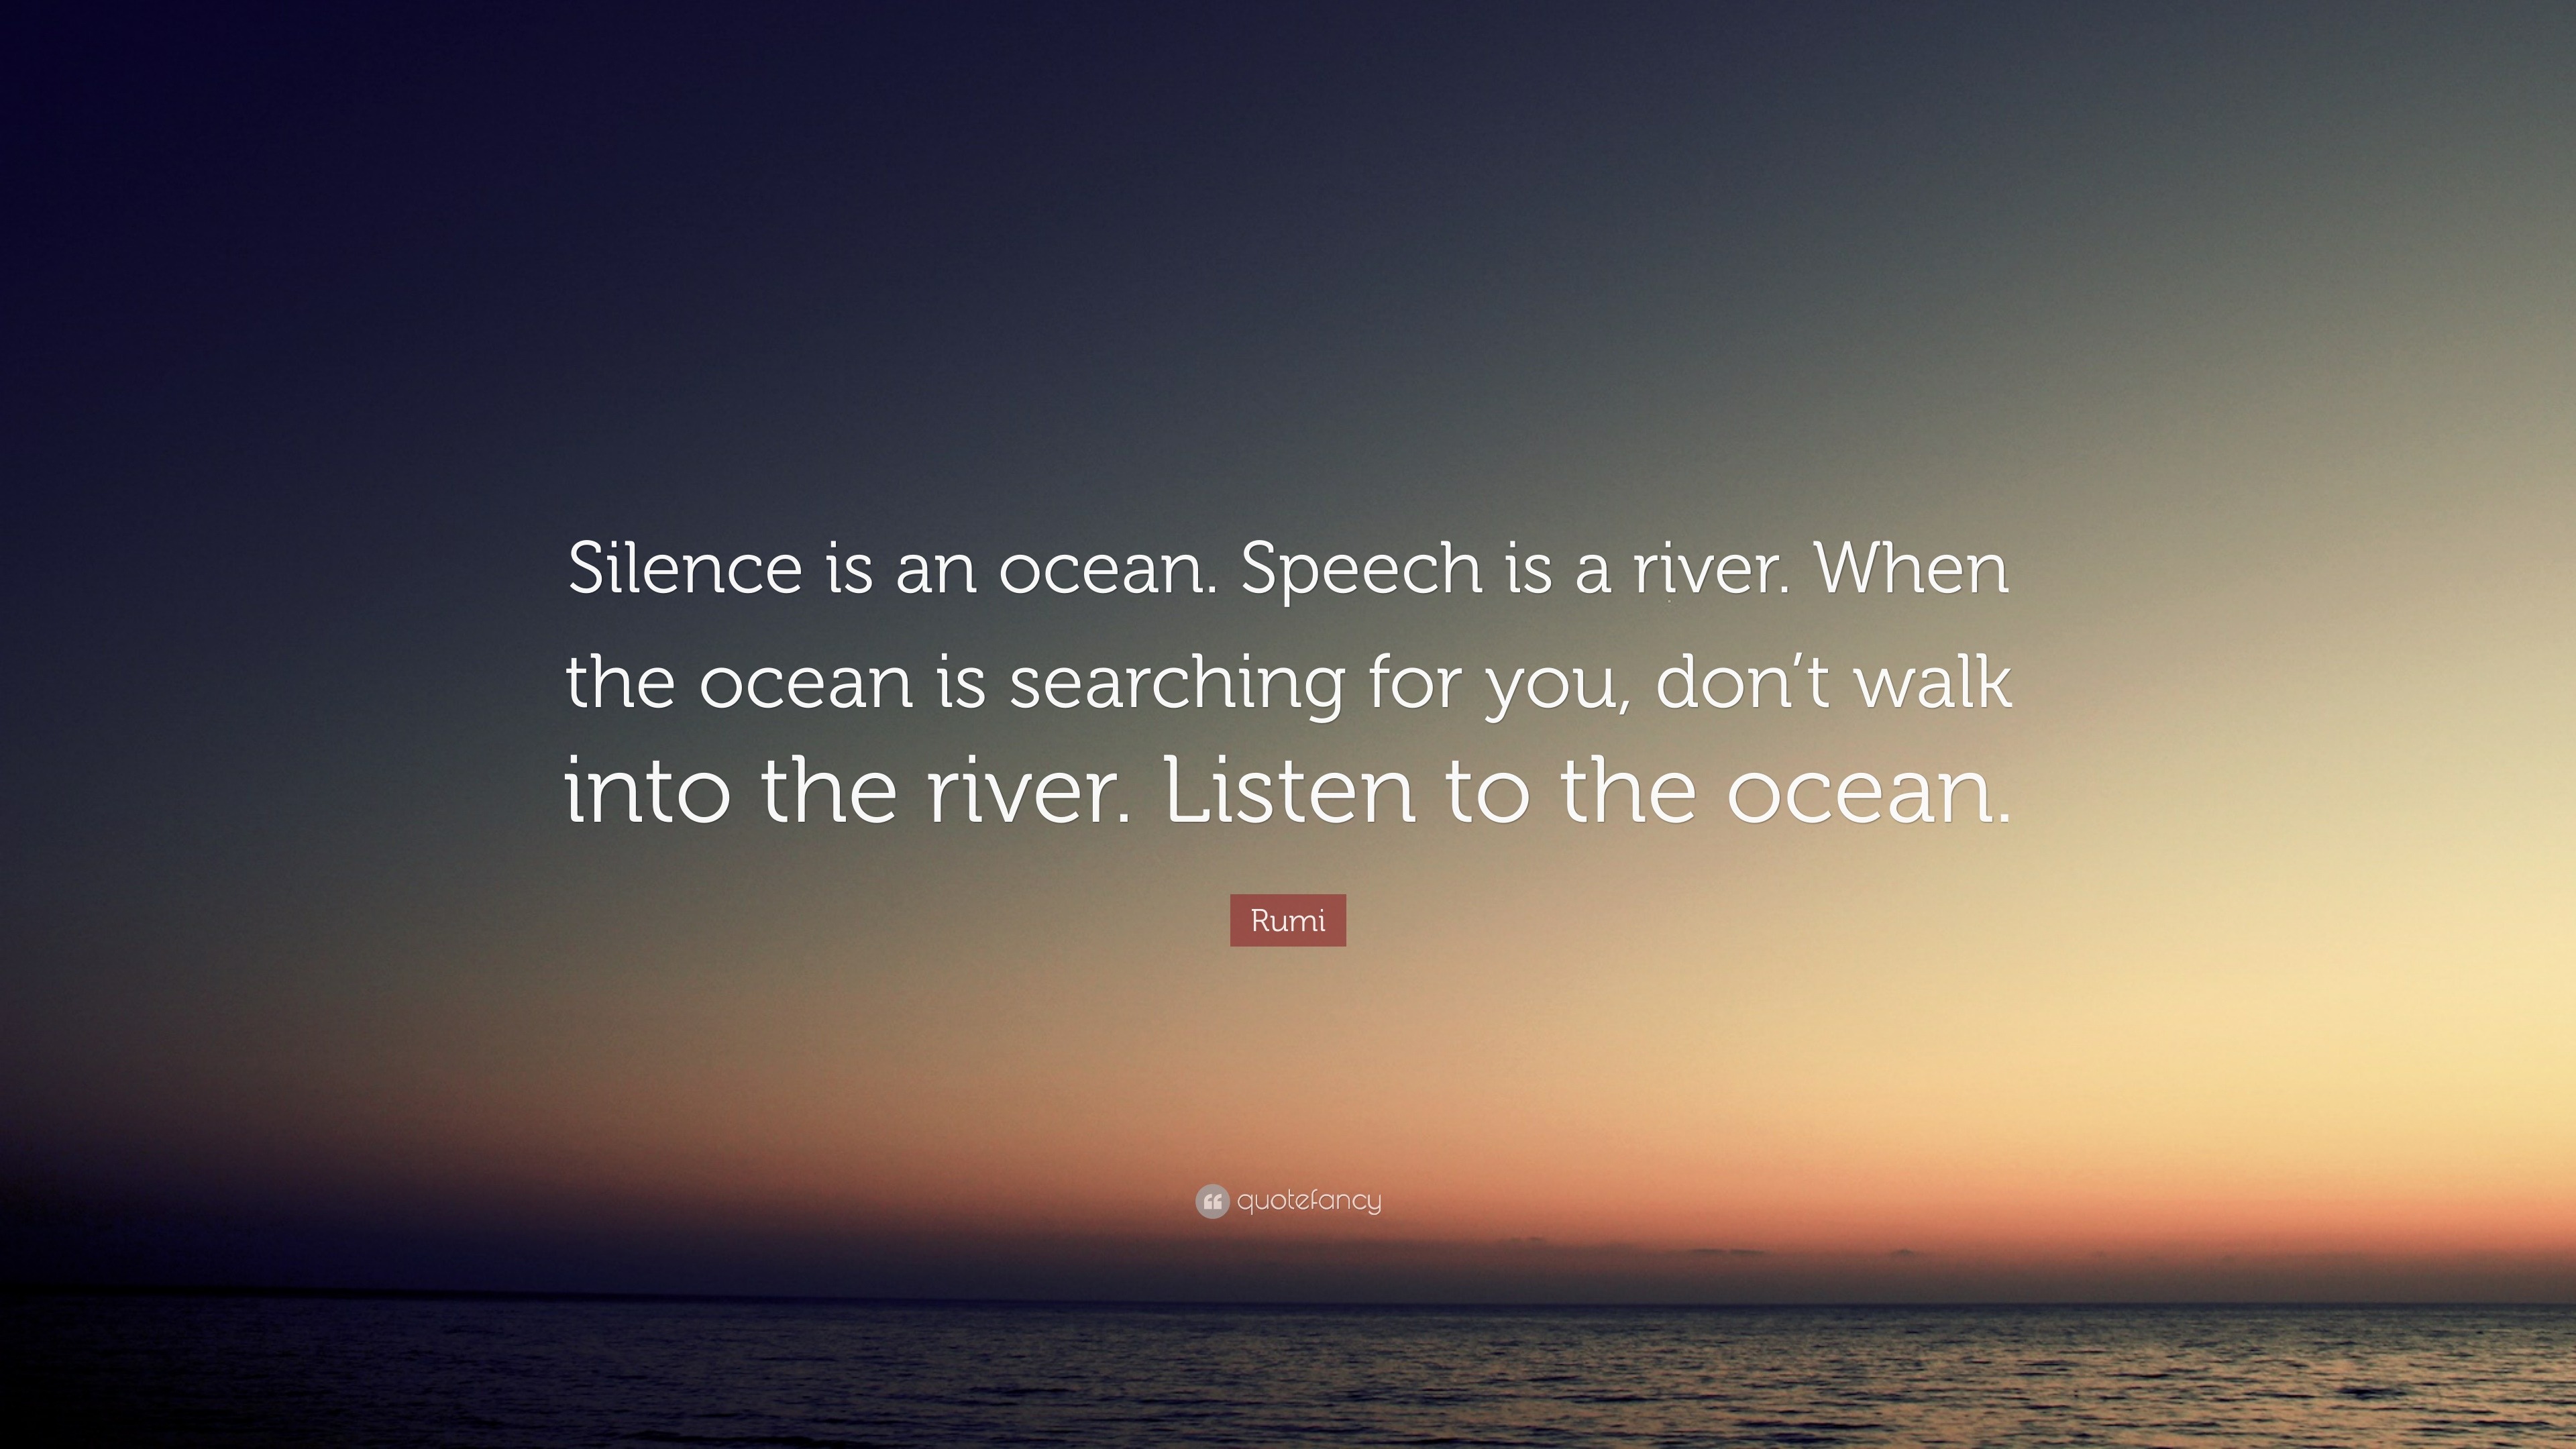 Rumi Quote: “Silence is an ocean. Speech is a river. When the ocean is